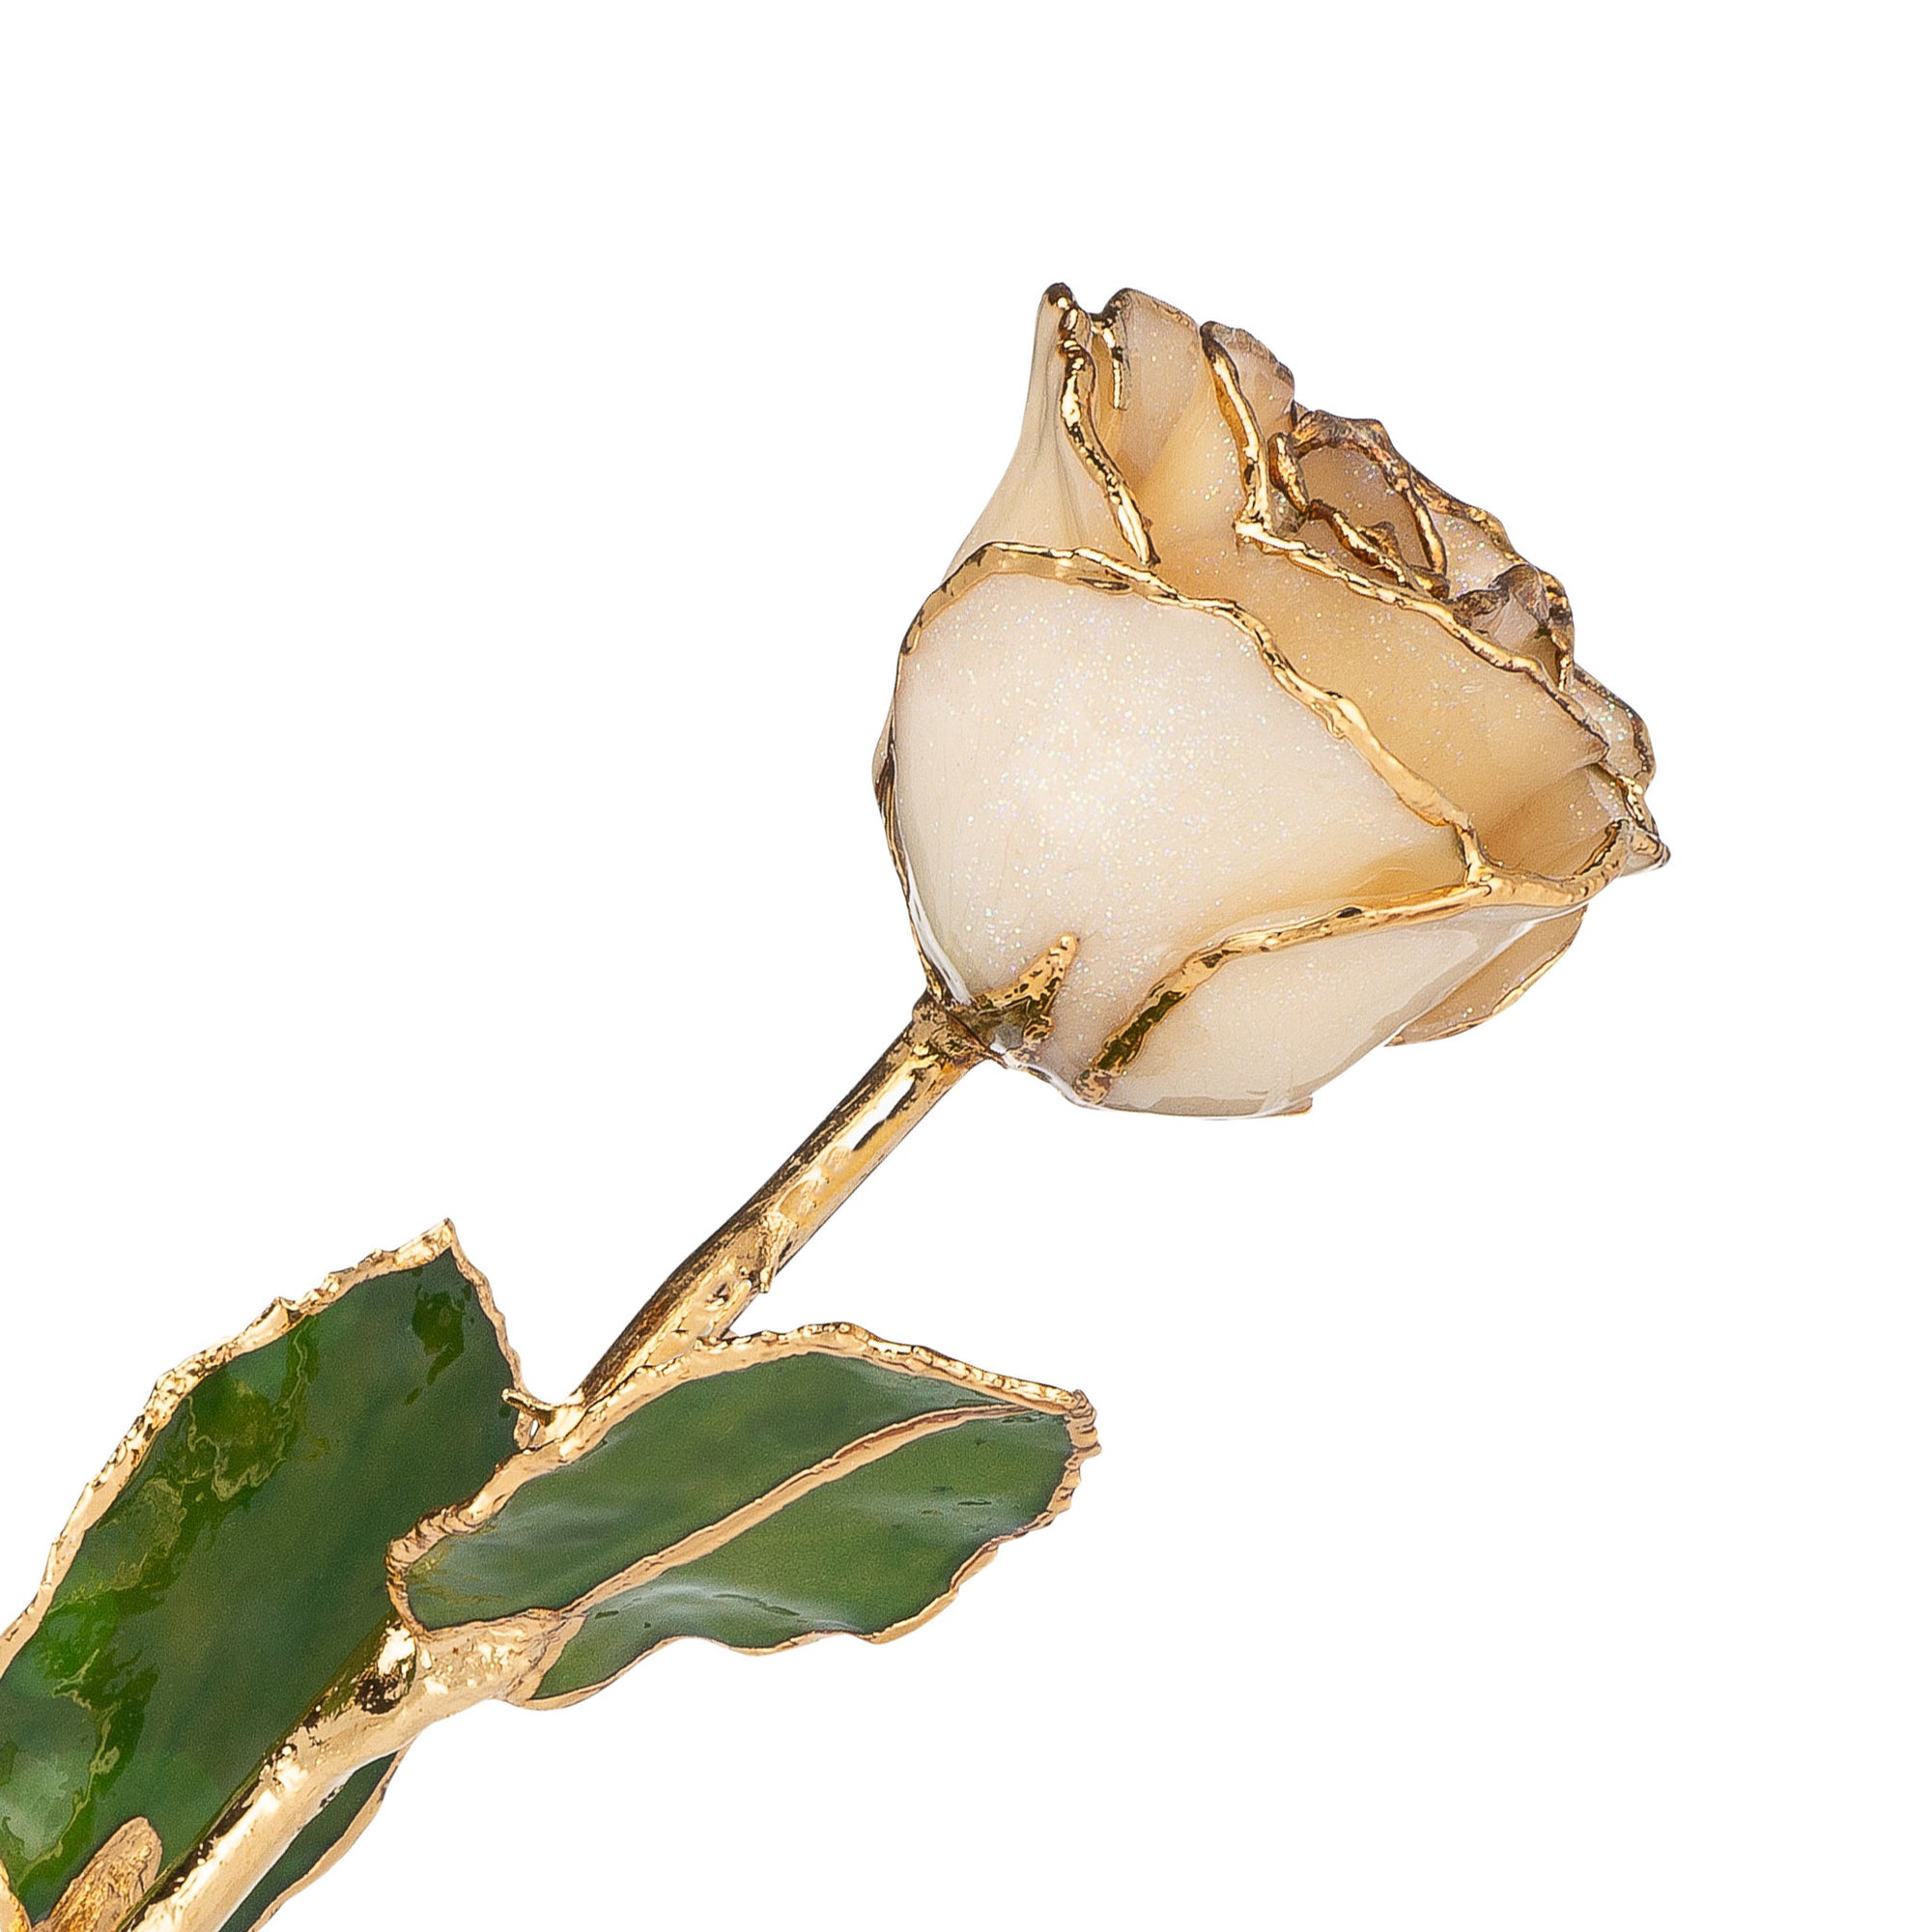 The Forever Rose Official Site Real Roses Dipped In 24k Gold